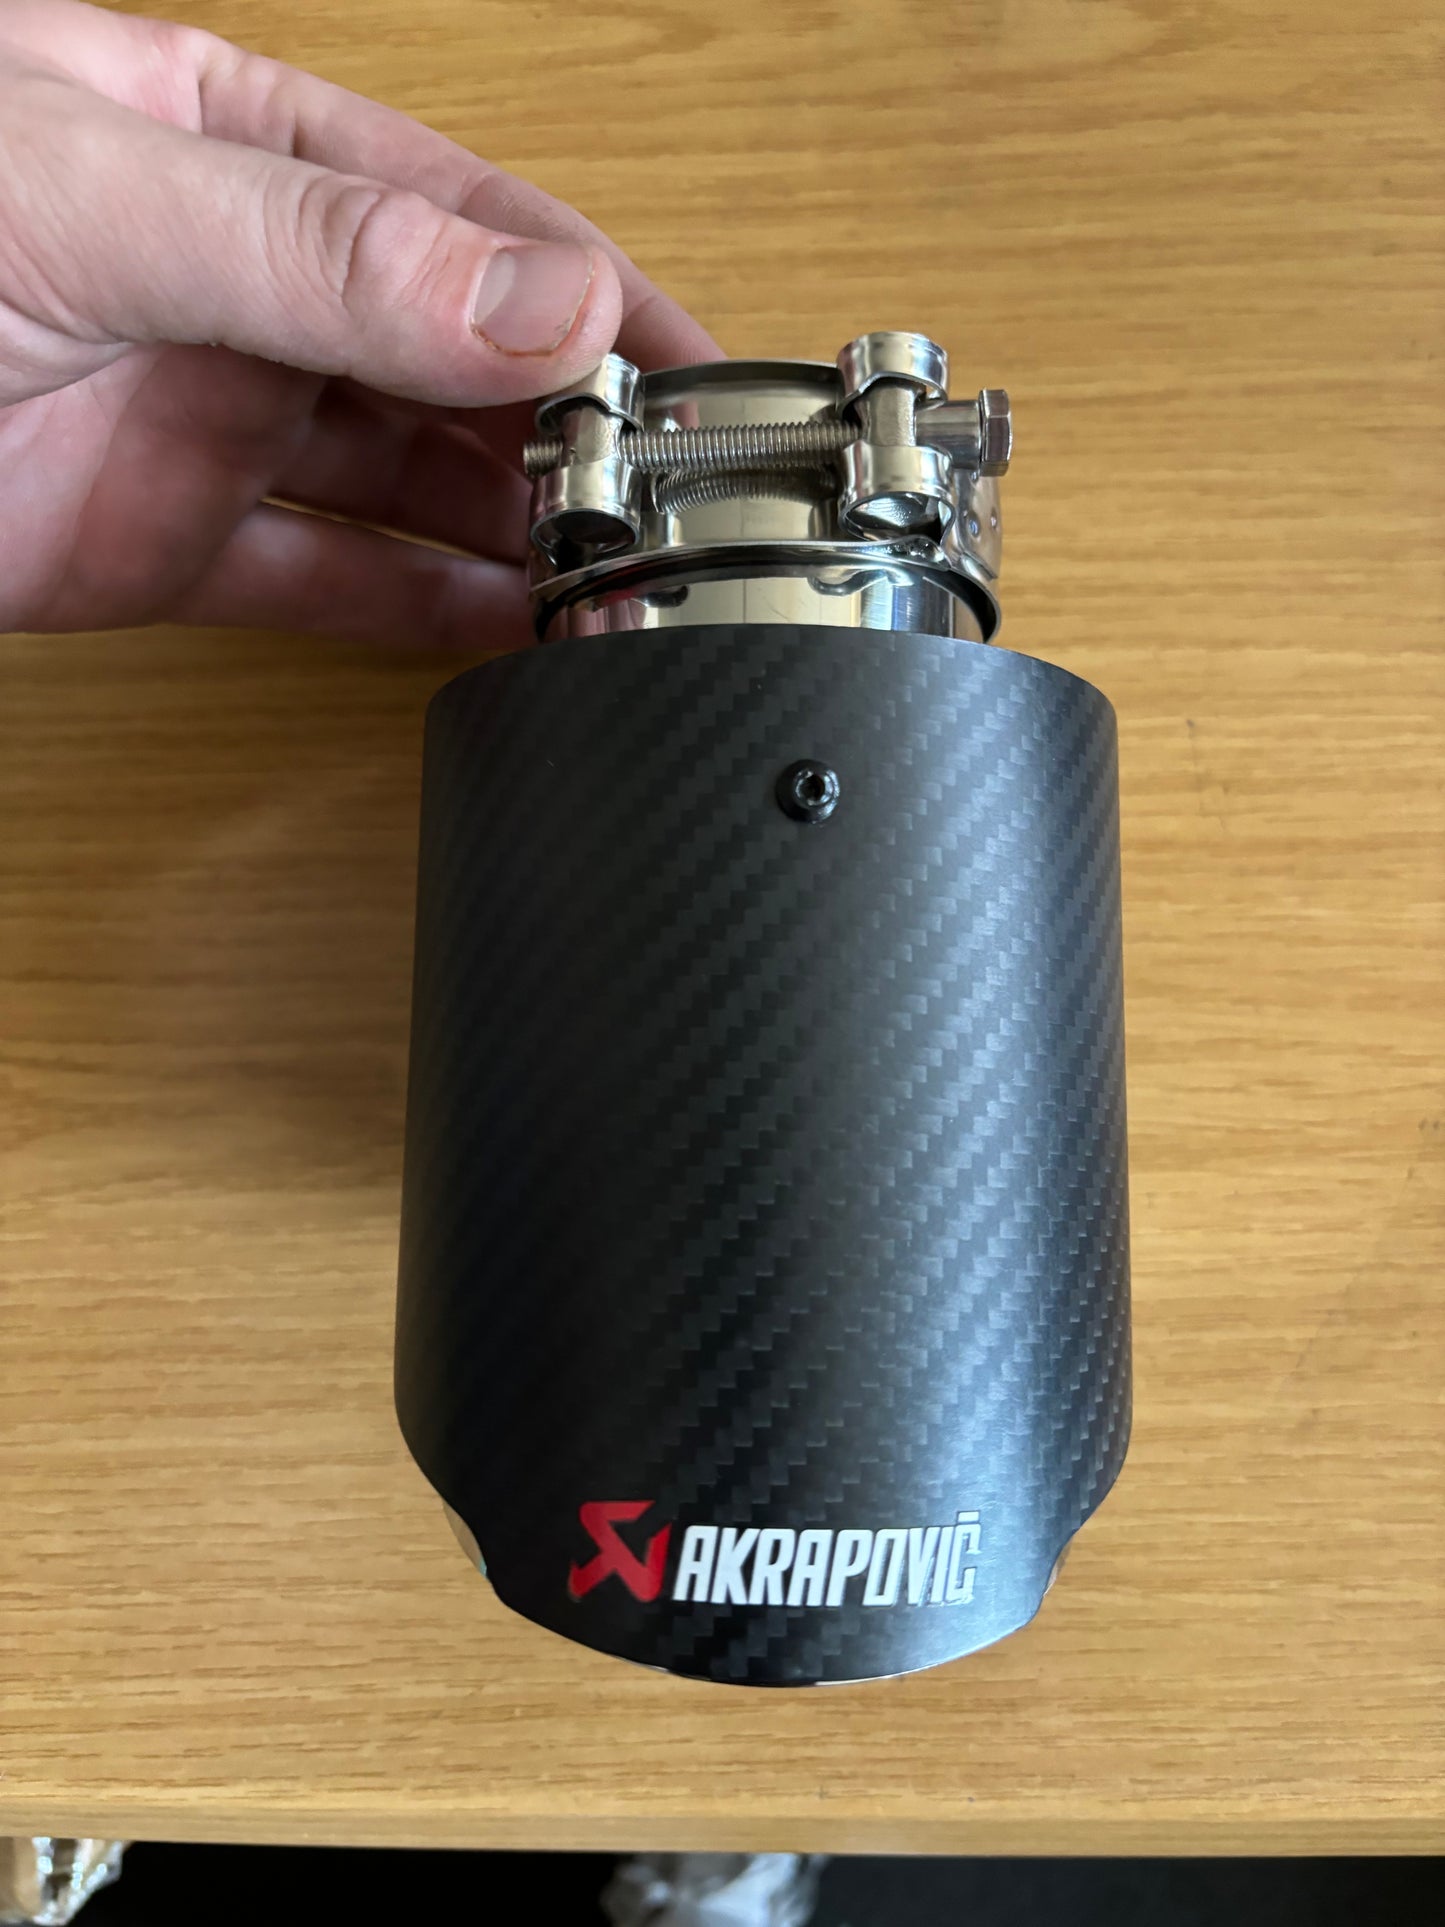 Akropovic bolt on 101mm exhaust tip